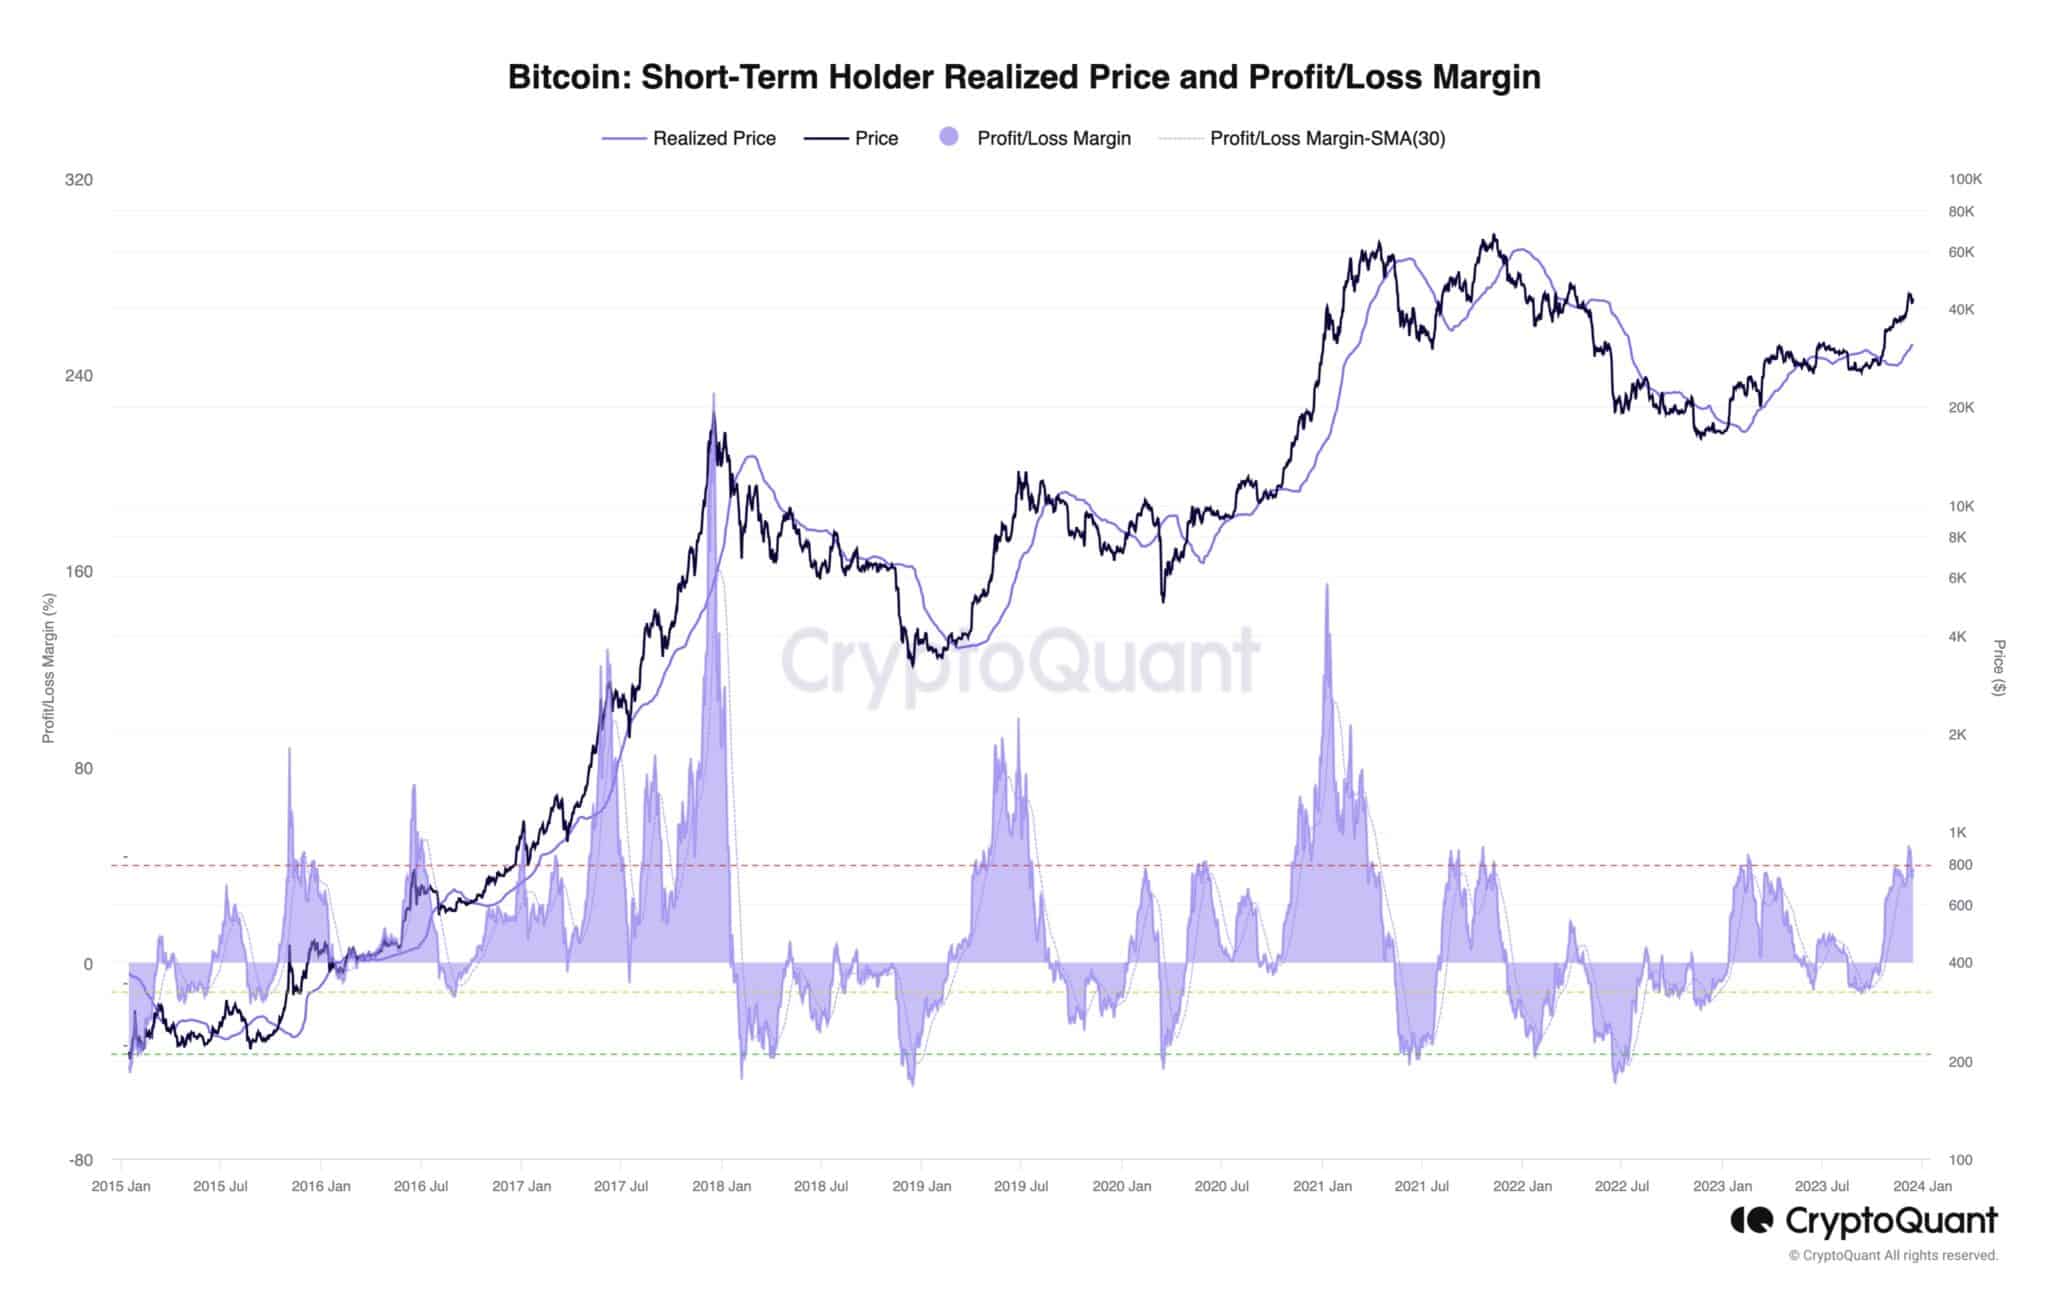 Bitcoin STH Realized Price and ProfitLoss Margin CryptoQuant